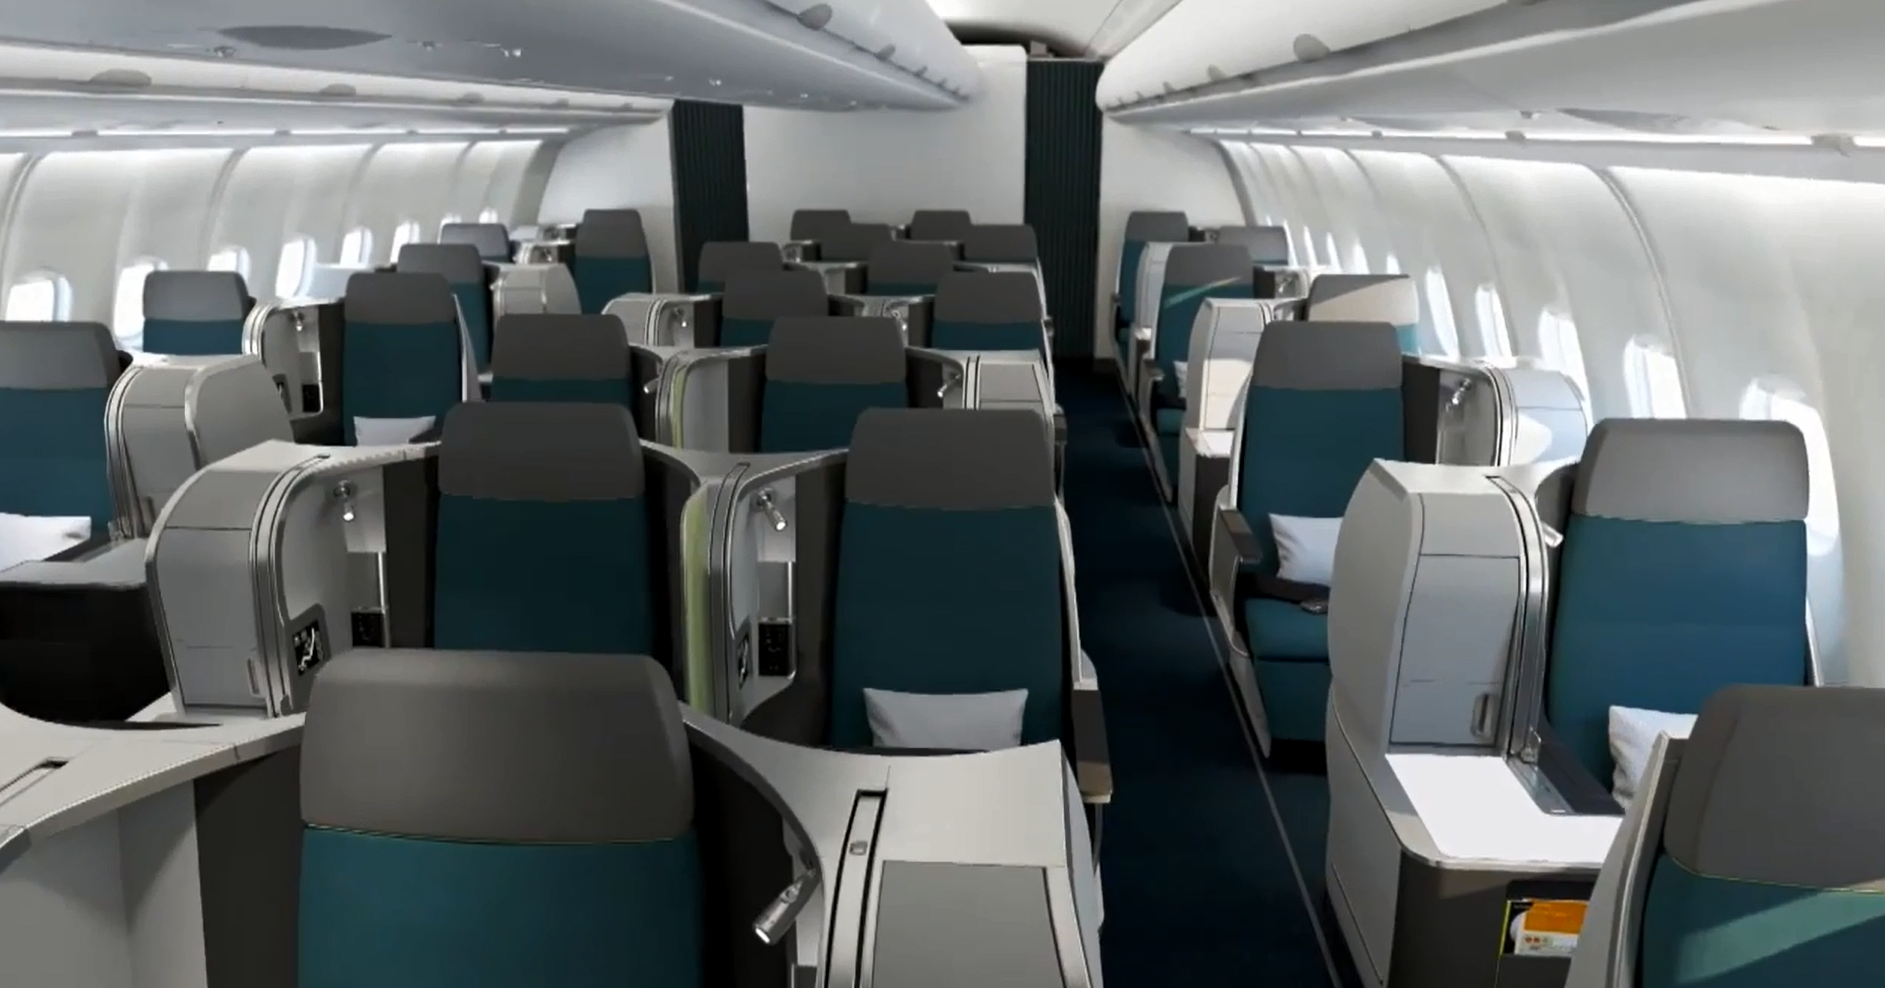 Aer Lingus – New Business Class